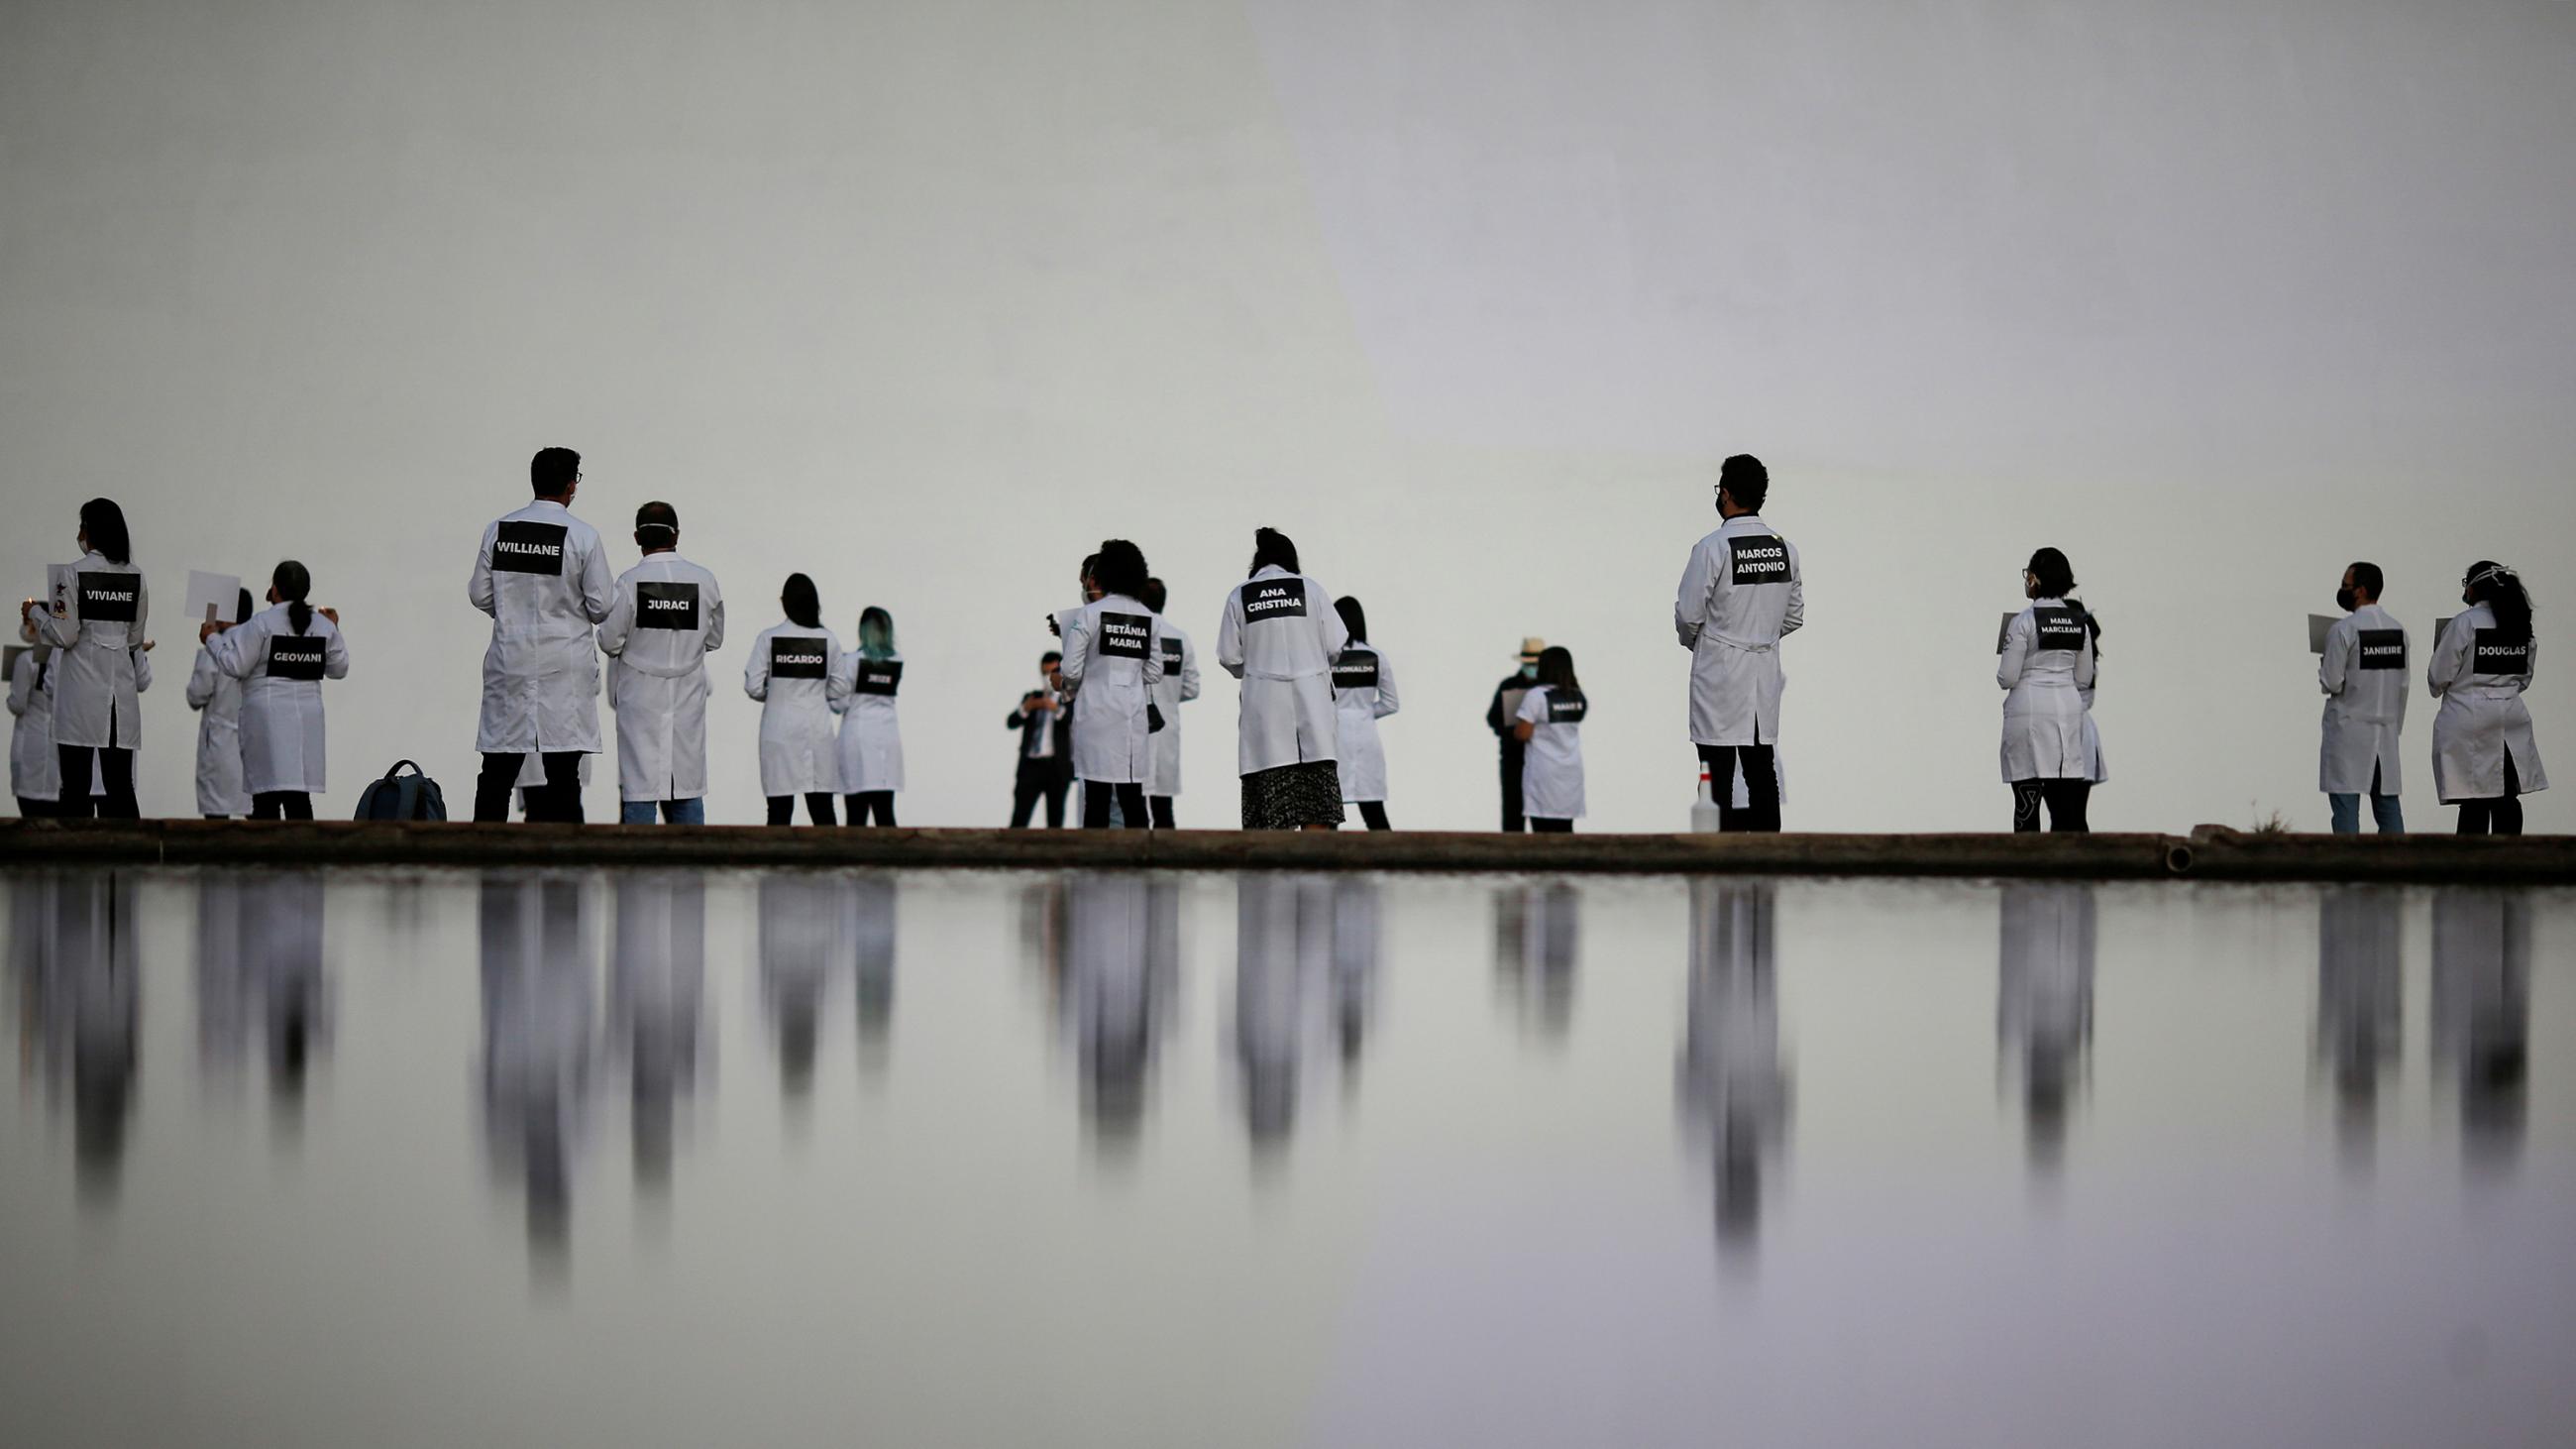 The image showsa bunch of people wearing white nurses' uniforms standing in the distance by a reflecting pool. 